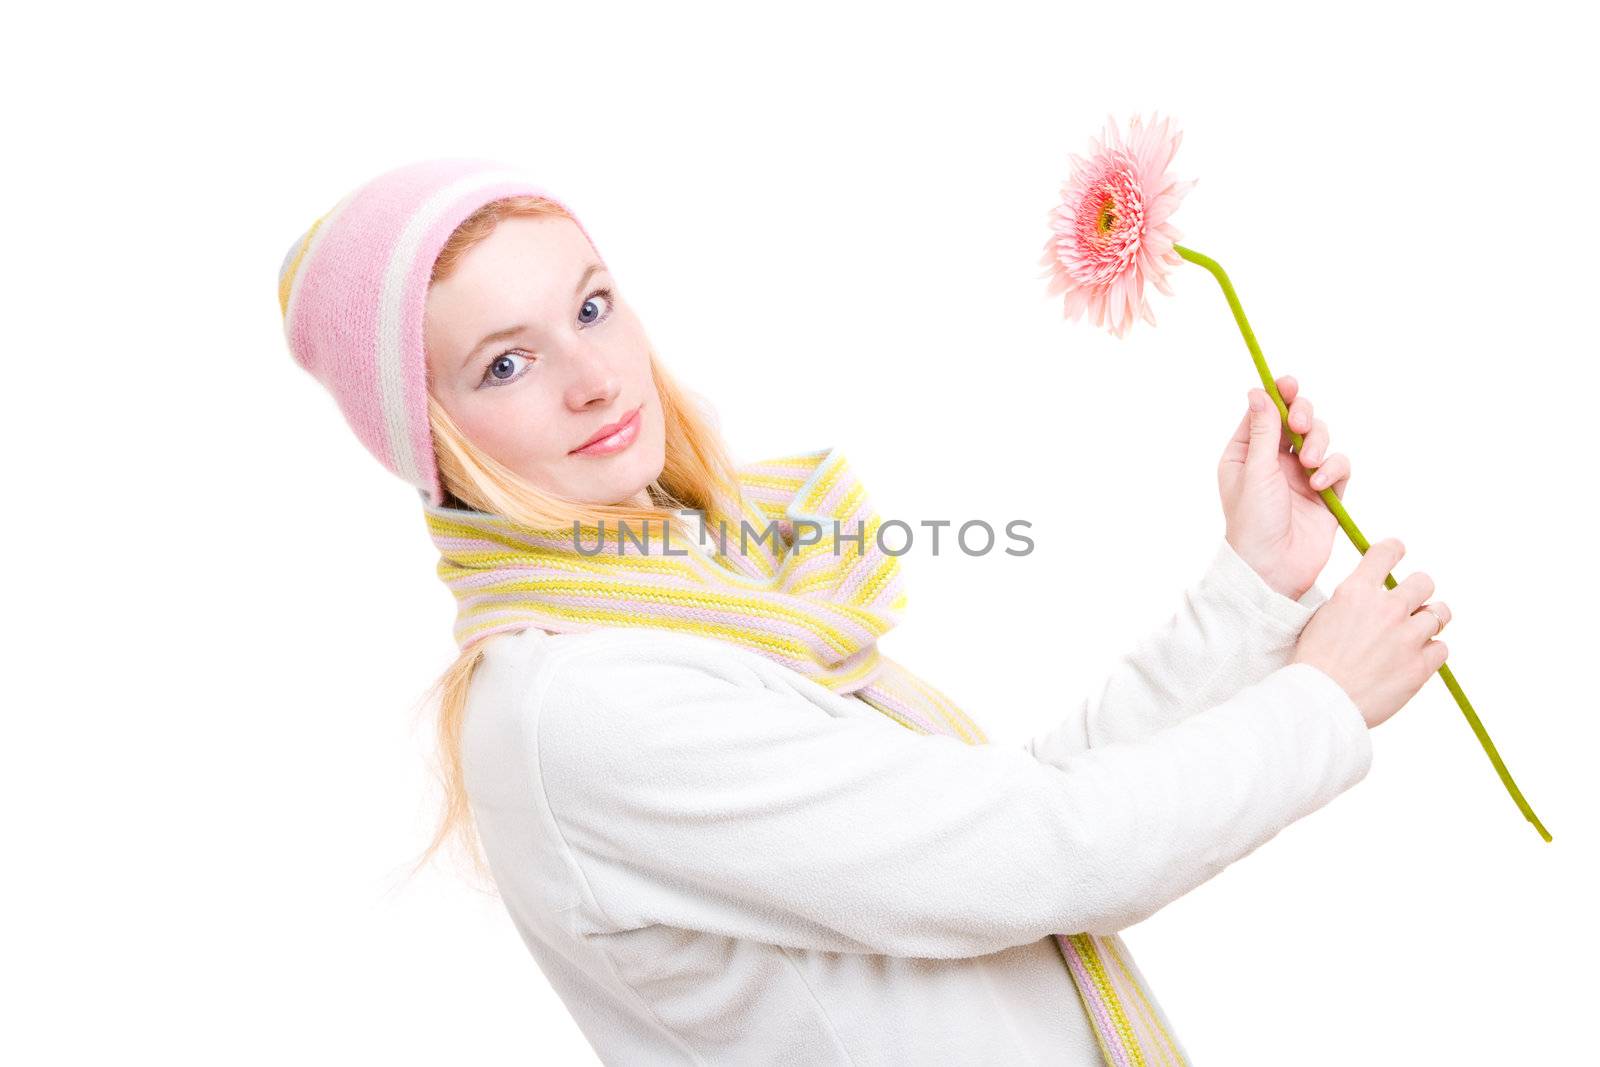 The pretty woman dance with a pink flower in hands